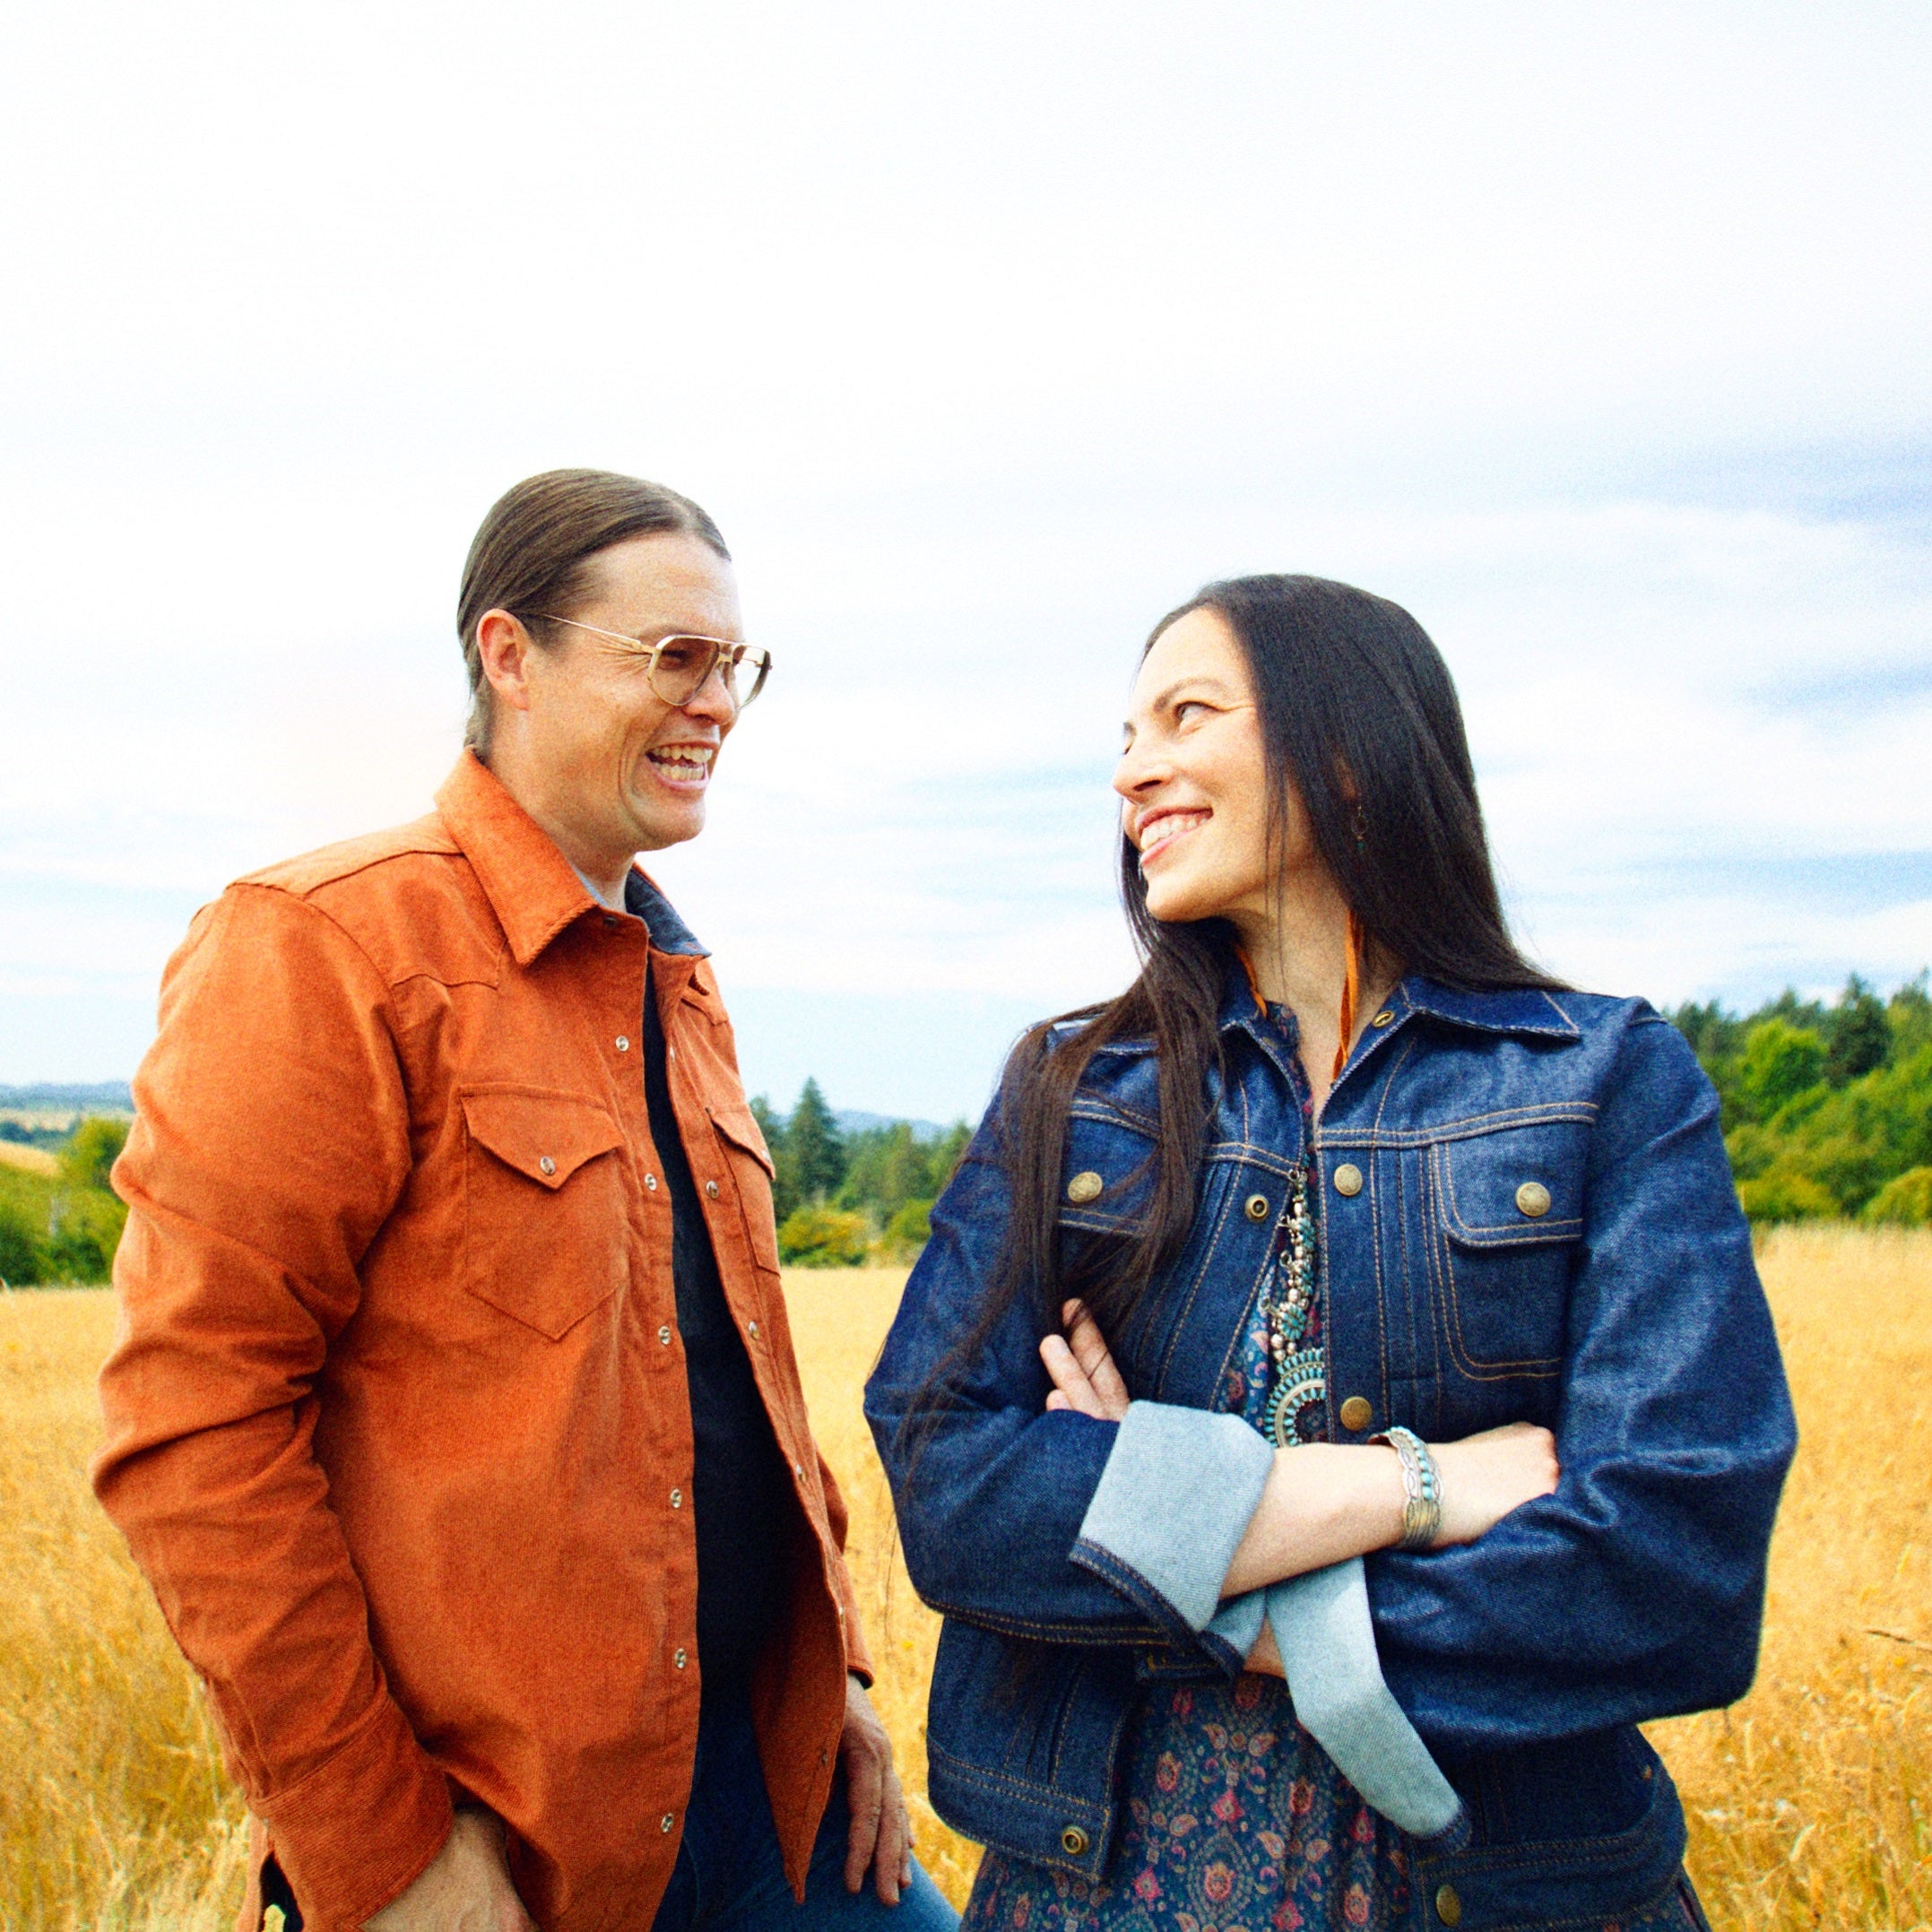 Ginew Clothing company Co-founders Native American Amanda Bruegl and Erik Brodt in field